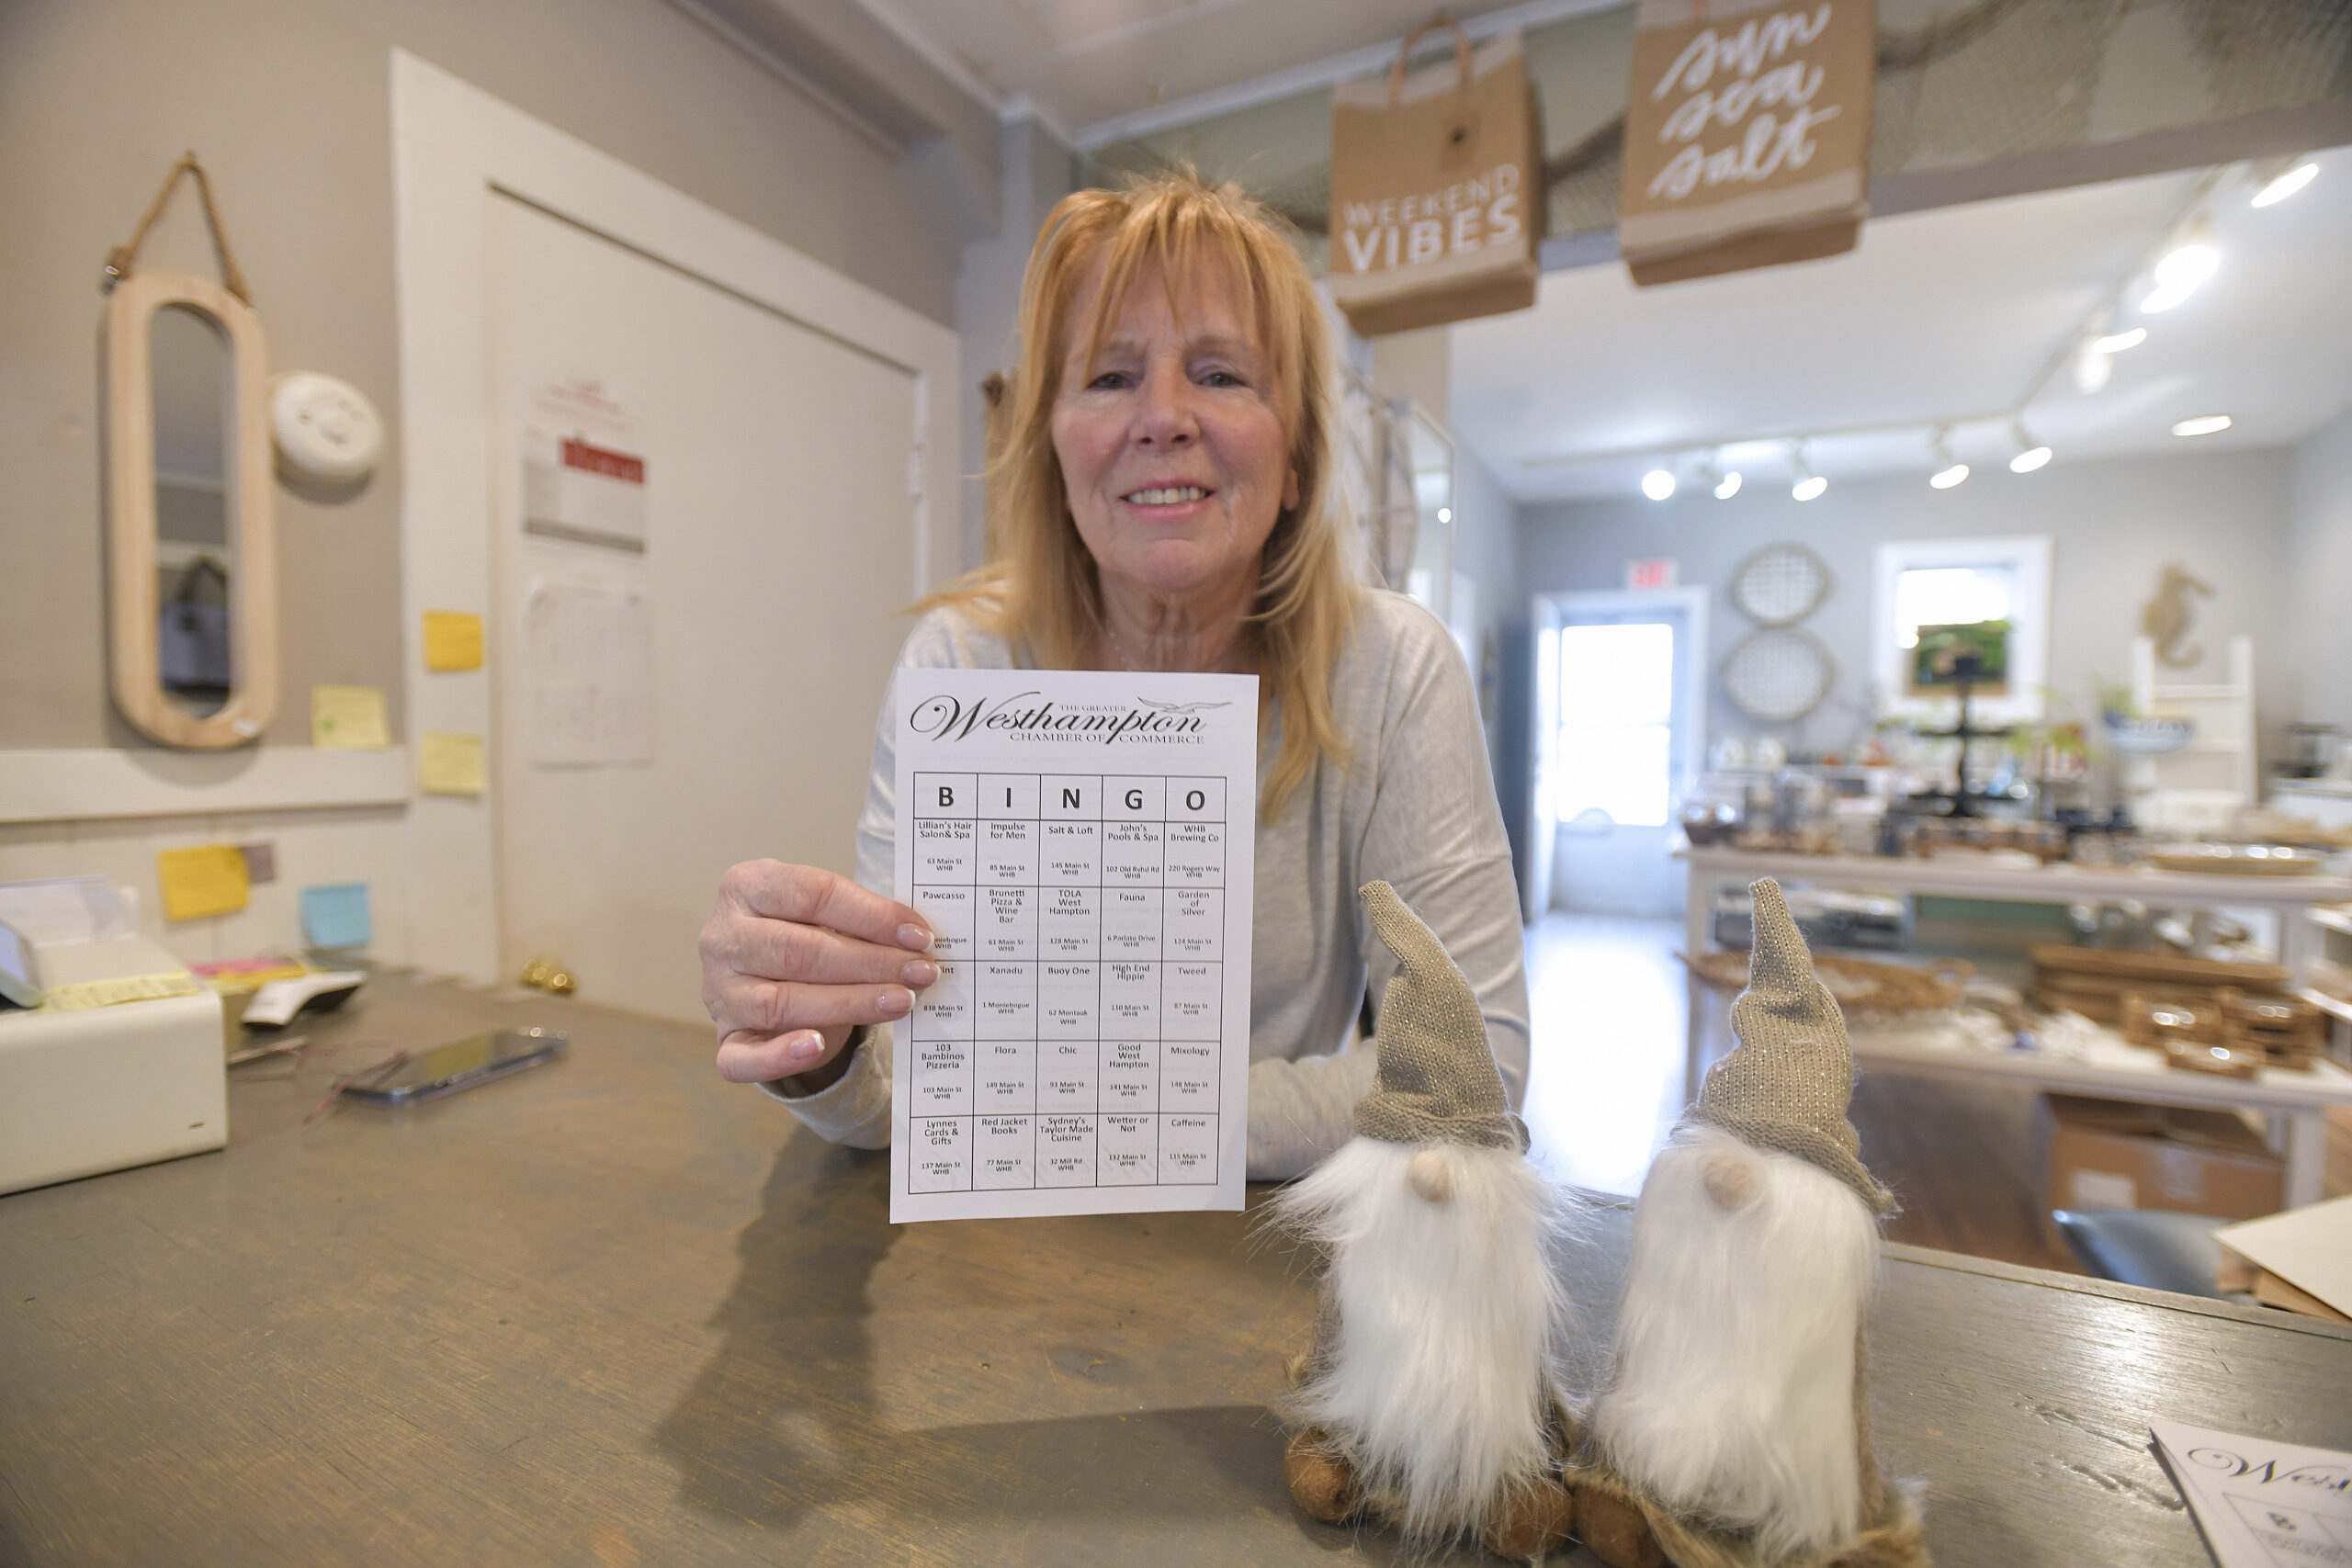 Claudio Perillo with a bingo card at Tweed, one of the participating businesses.   DANA SHAW